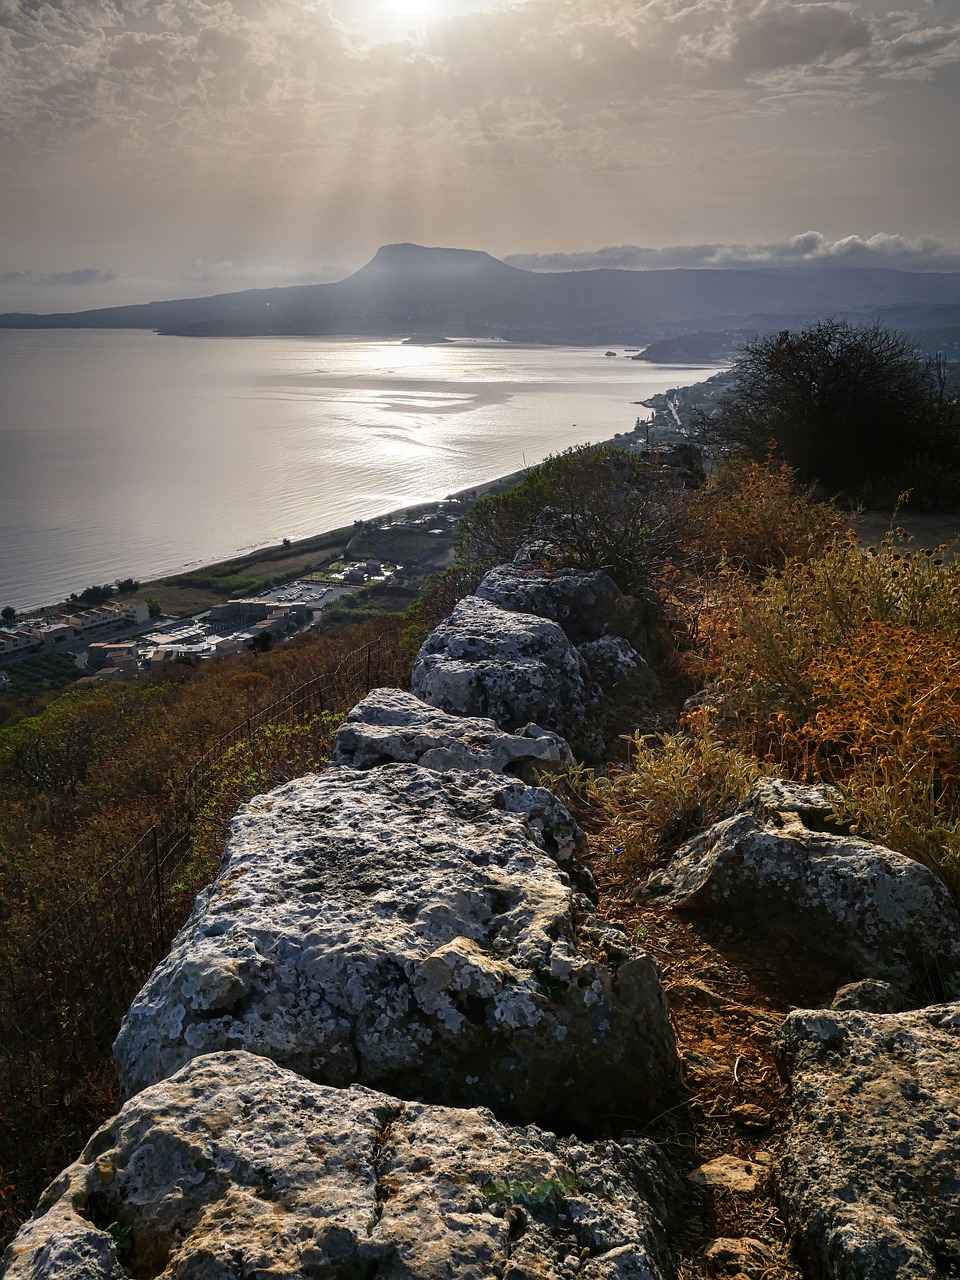 Cretan Adventure: From Chania to Elafonisi and Beyond